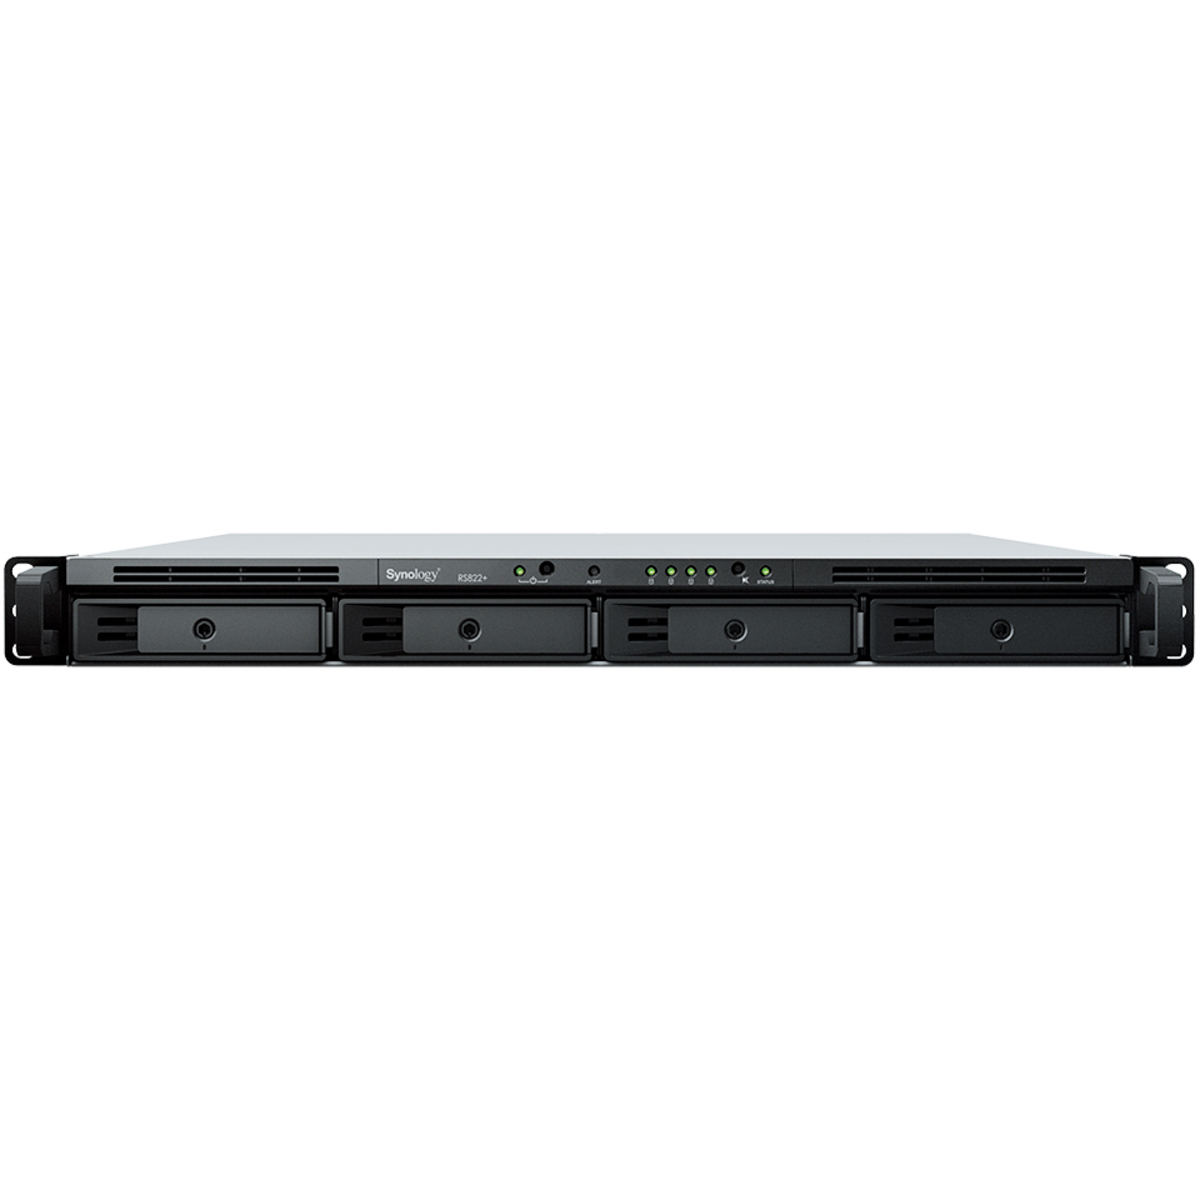 Synology RackStation RS822+ 1tb 4-Bay RackMount Multimedia / Power User / Business NAS - Network Attached Storage Device 2x500gb Crucial MX500 CT500MX500SSD1 2.5 560/510MB/s SATA 6Gb/s SSD CONSUMER Class Drives Installed - Burn-In Tested RackStation RS822+